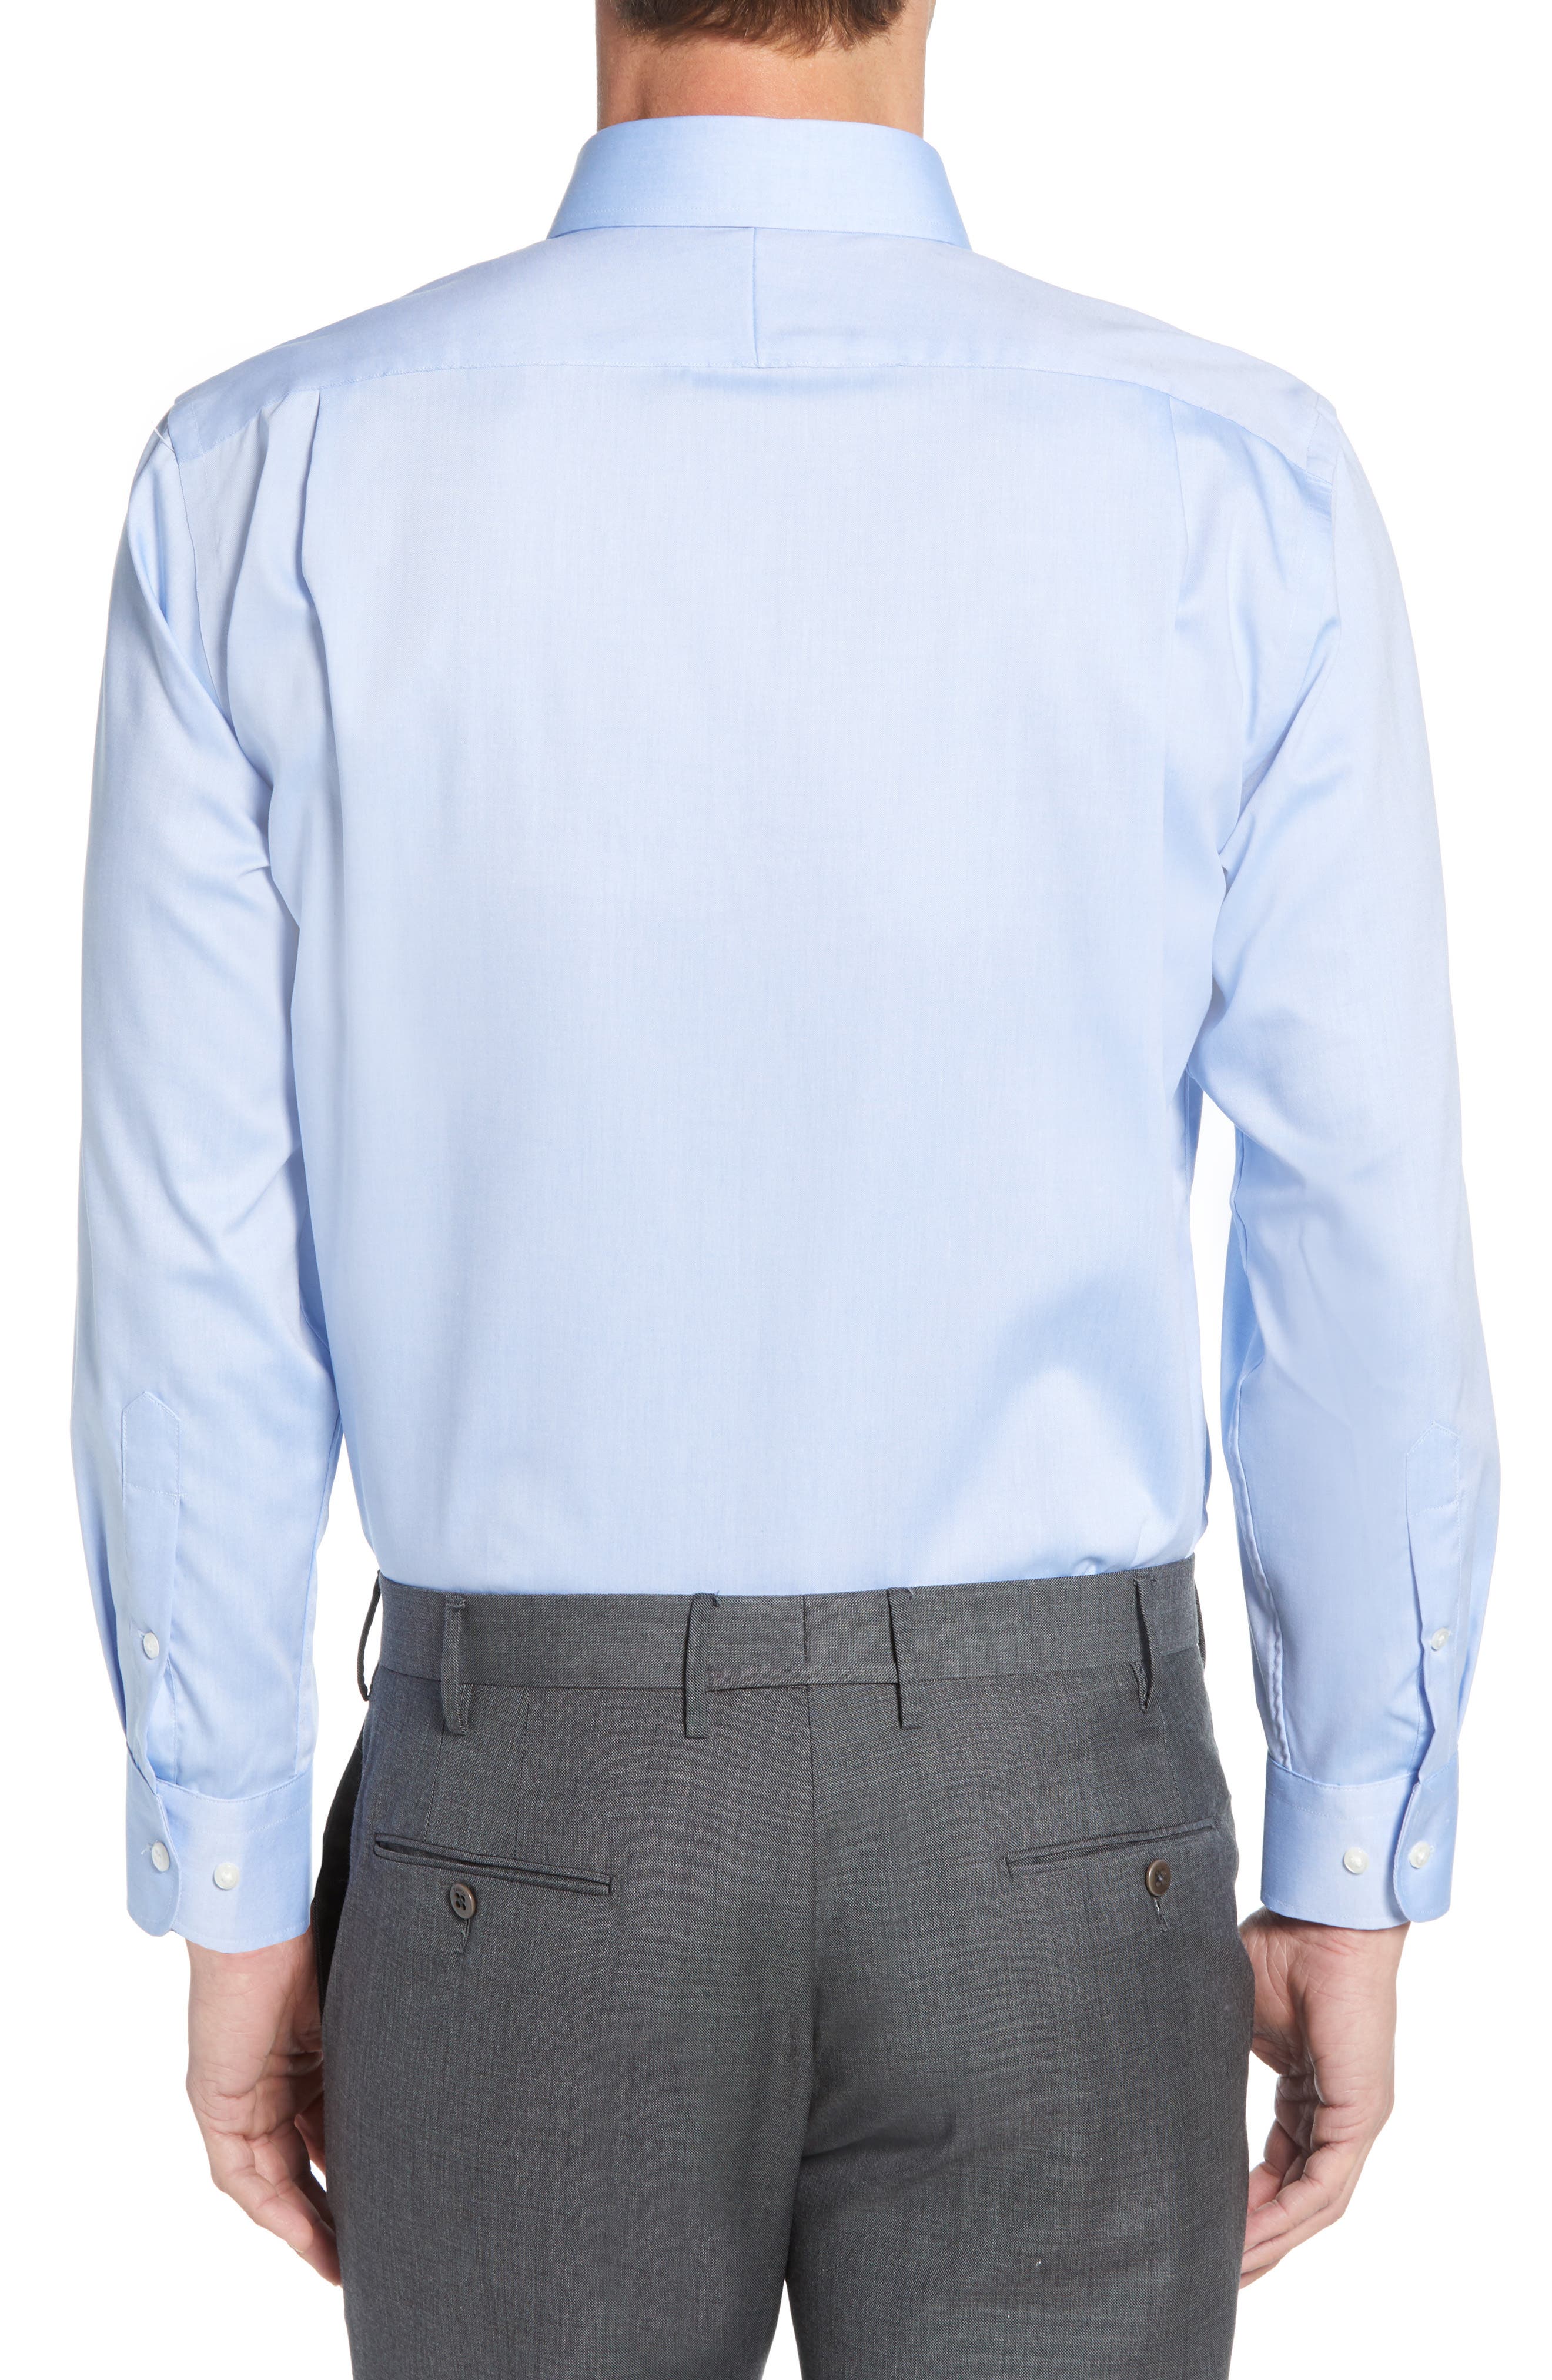 NORDSTROM MEN'S SHOP | Traditional Fit Non-Iron Dress Shirt | Nordstrom ...